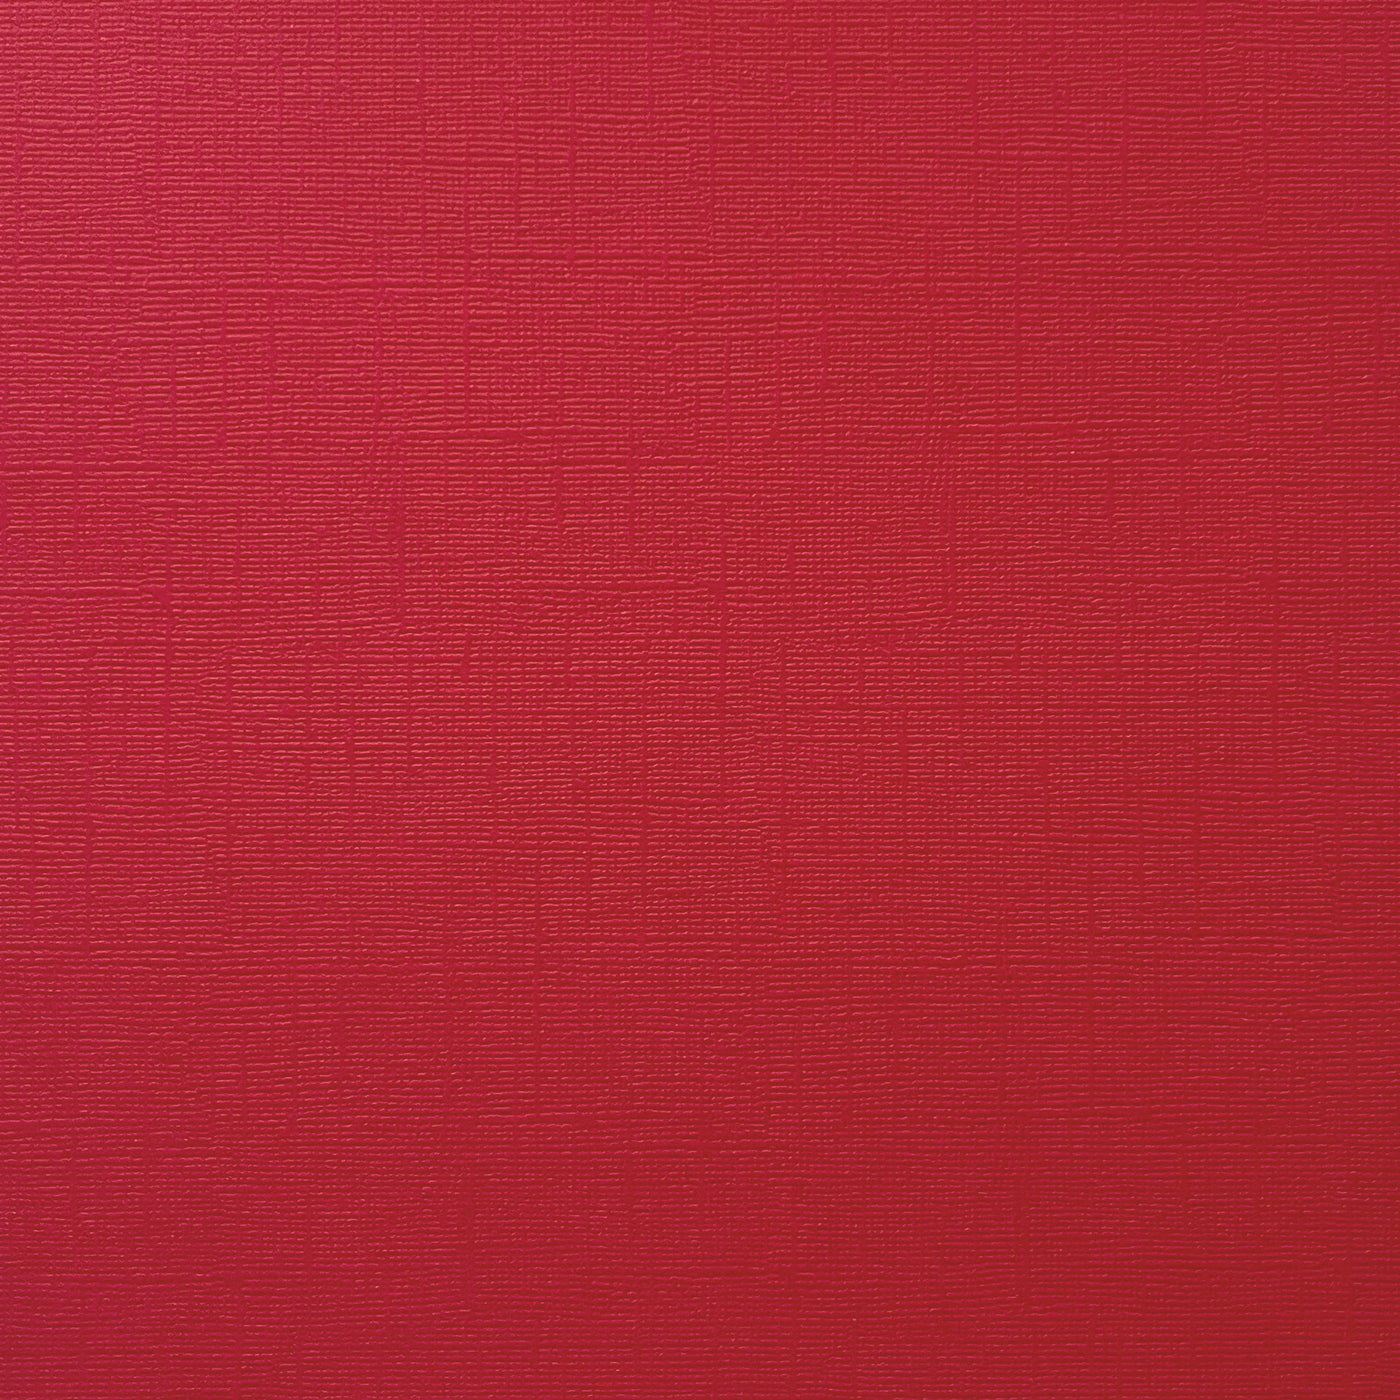 ALL AMERICAN RED - Textured Red 12x12 Cardstock - Encore Paper